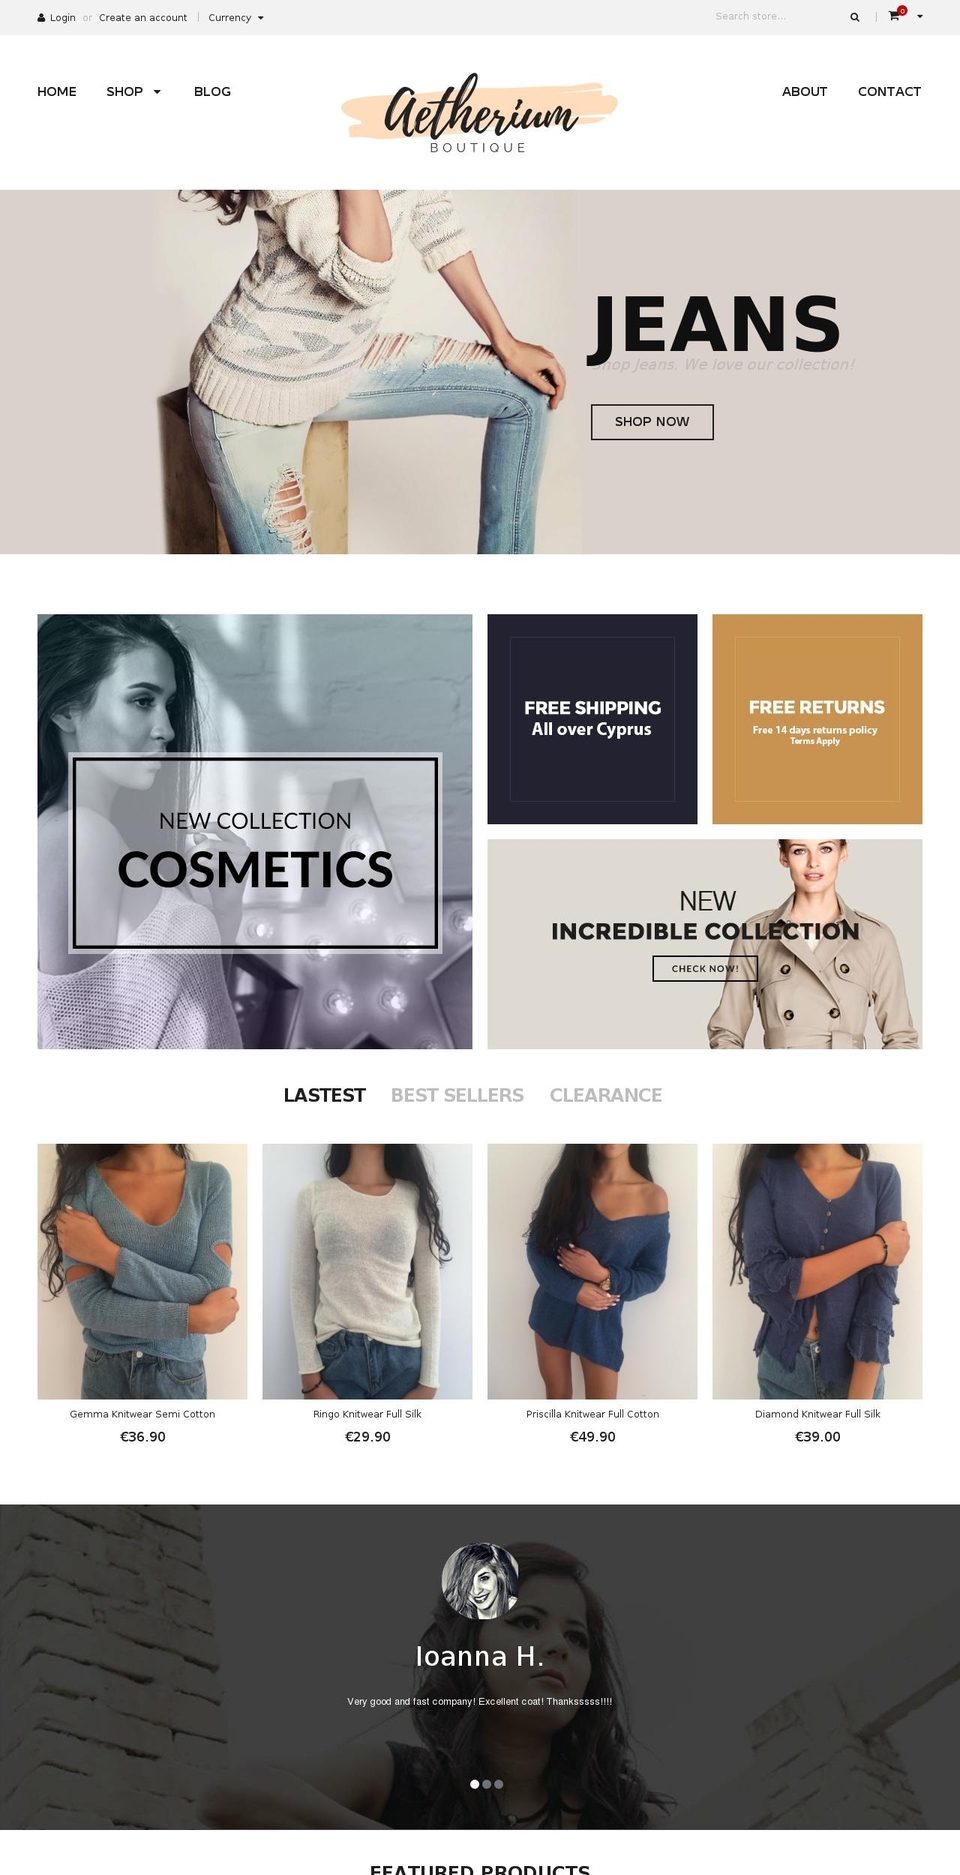 anormy-full-r34 Shopify theme site example aetherium.fashion